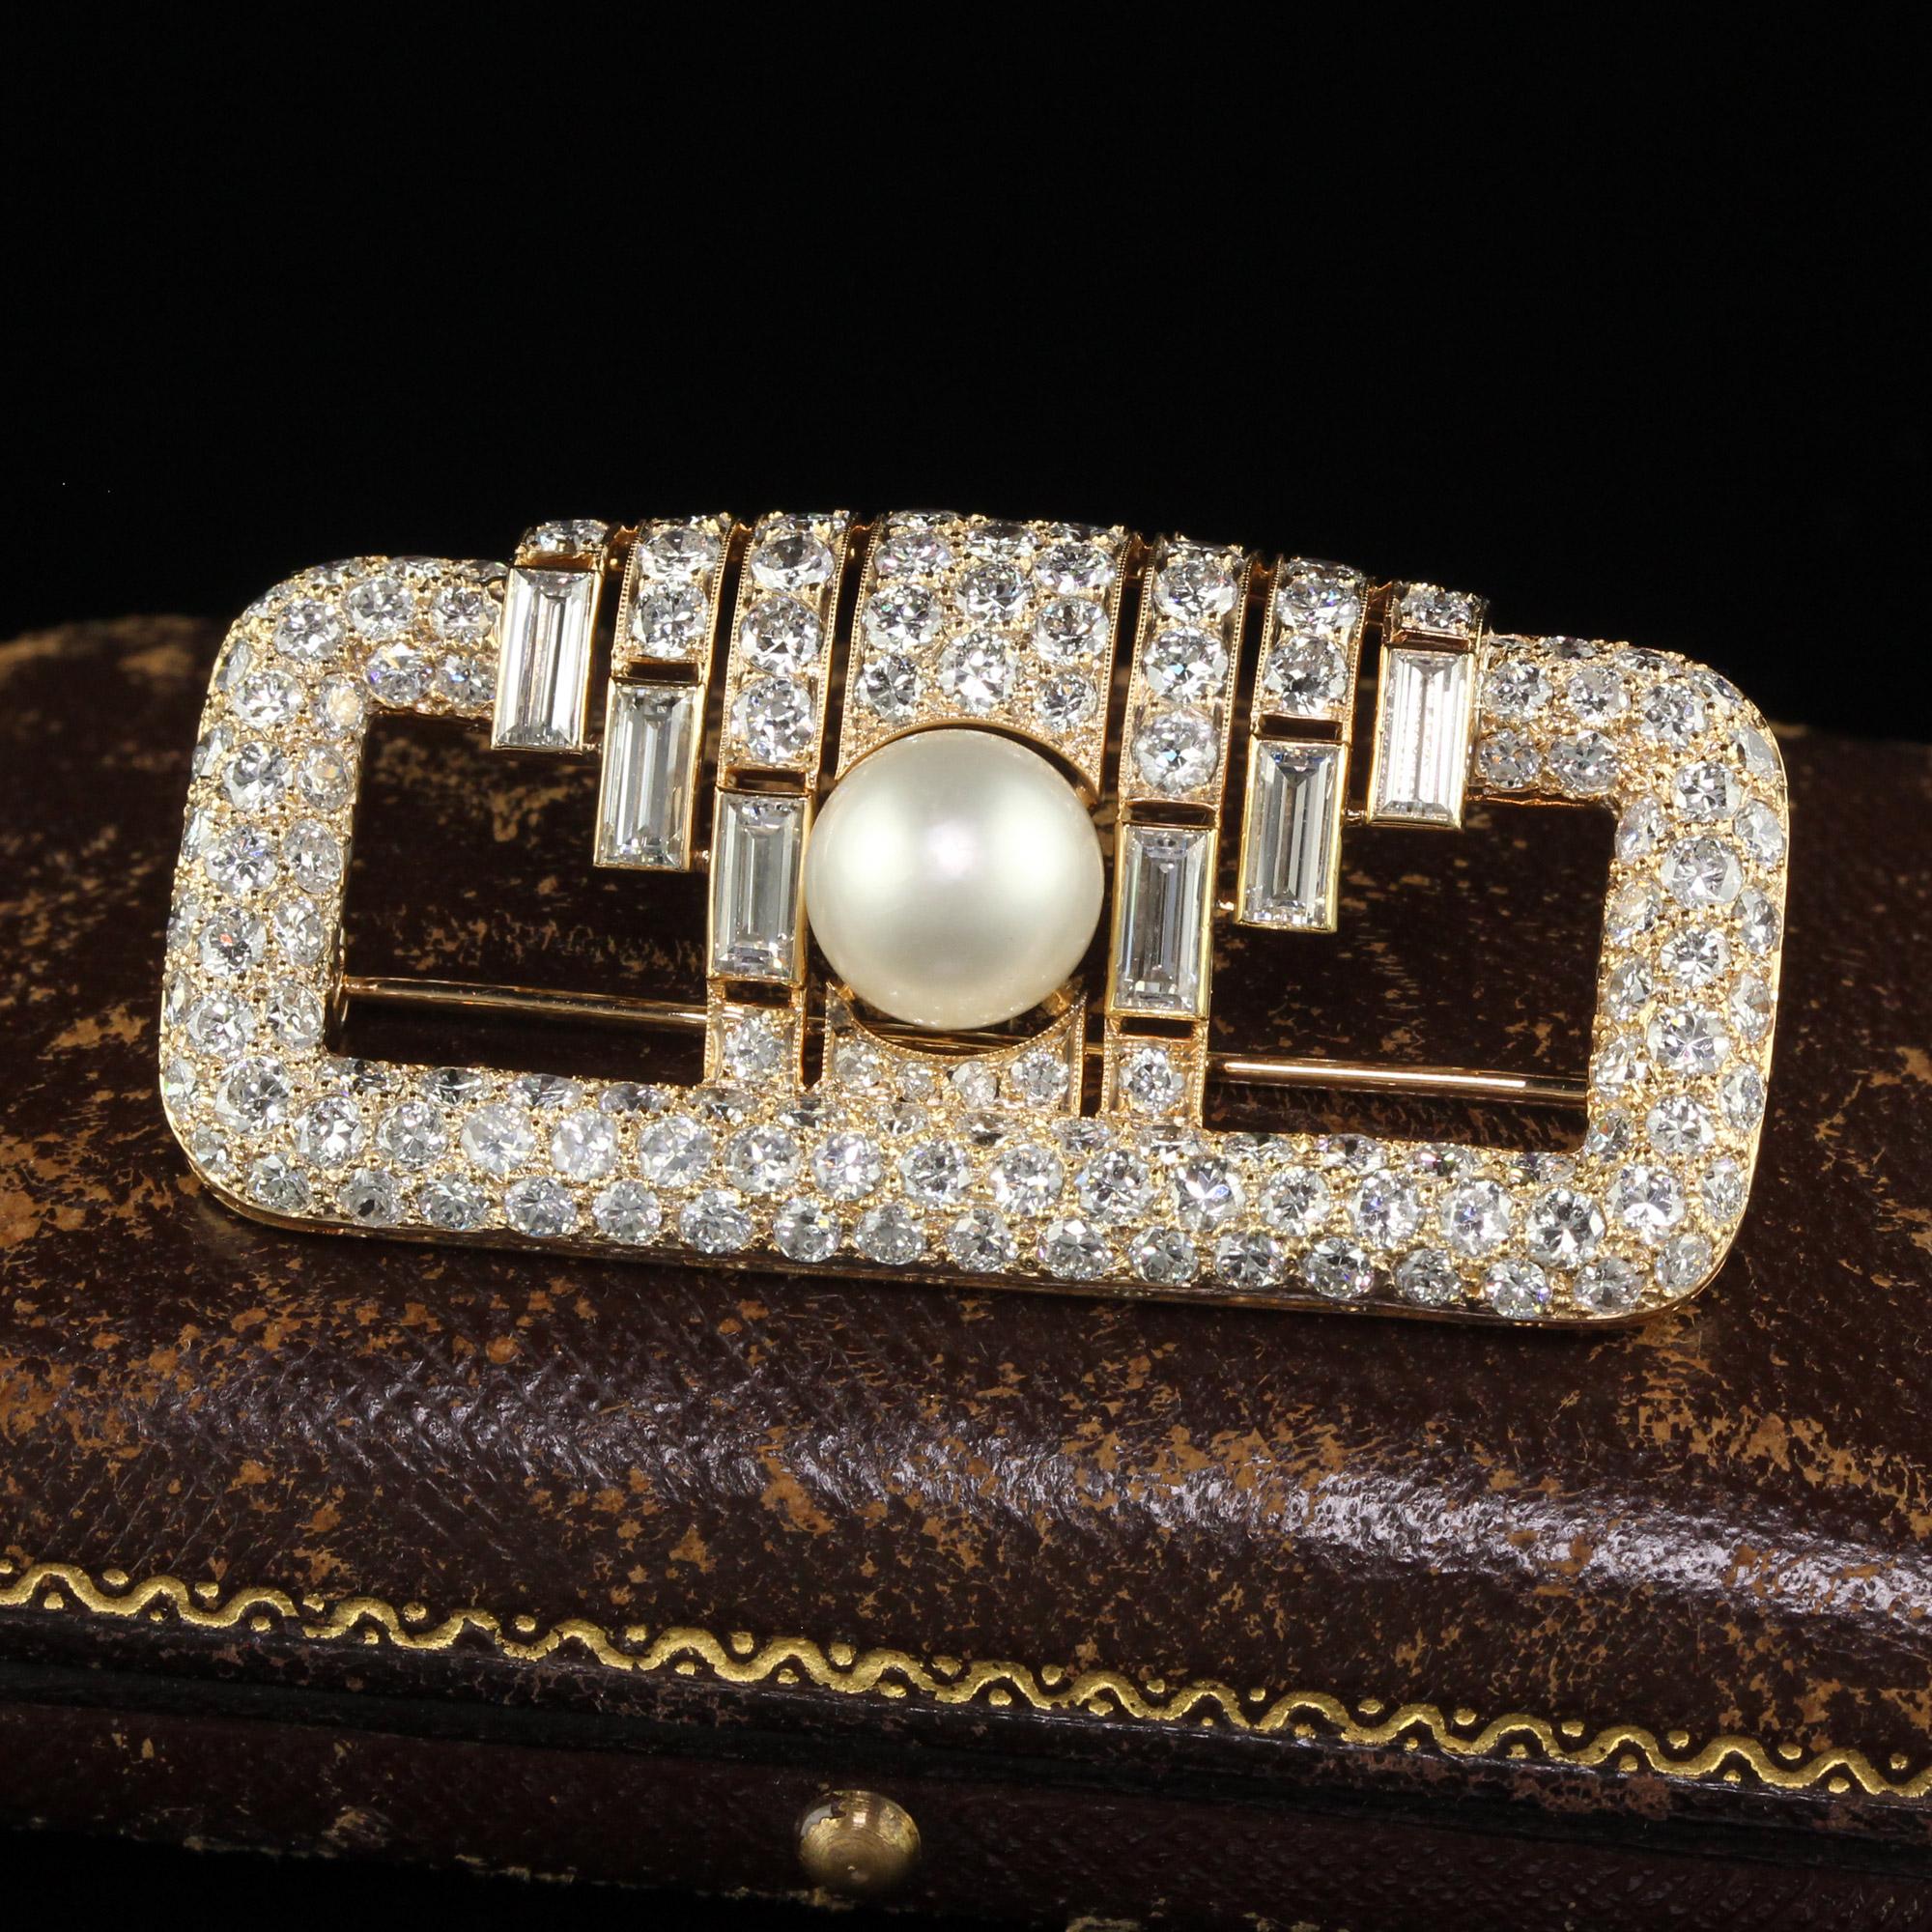 Beautiful Vintage Retro Cartier 18K Yellow Gold Diamond Natural Pearl Brooch Pin - GIA. This gorgeous Cartier brooch is crafted in 18k yellow gold. The center of the brooch has a large natural pearl that has a GIA report. The brooch has beautiful